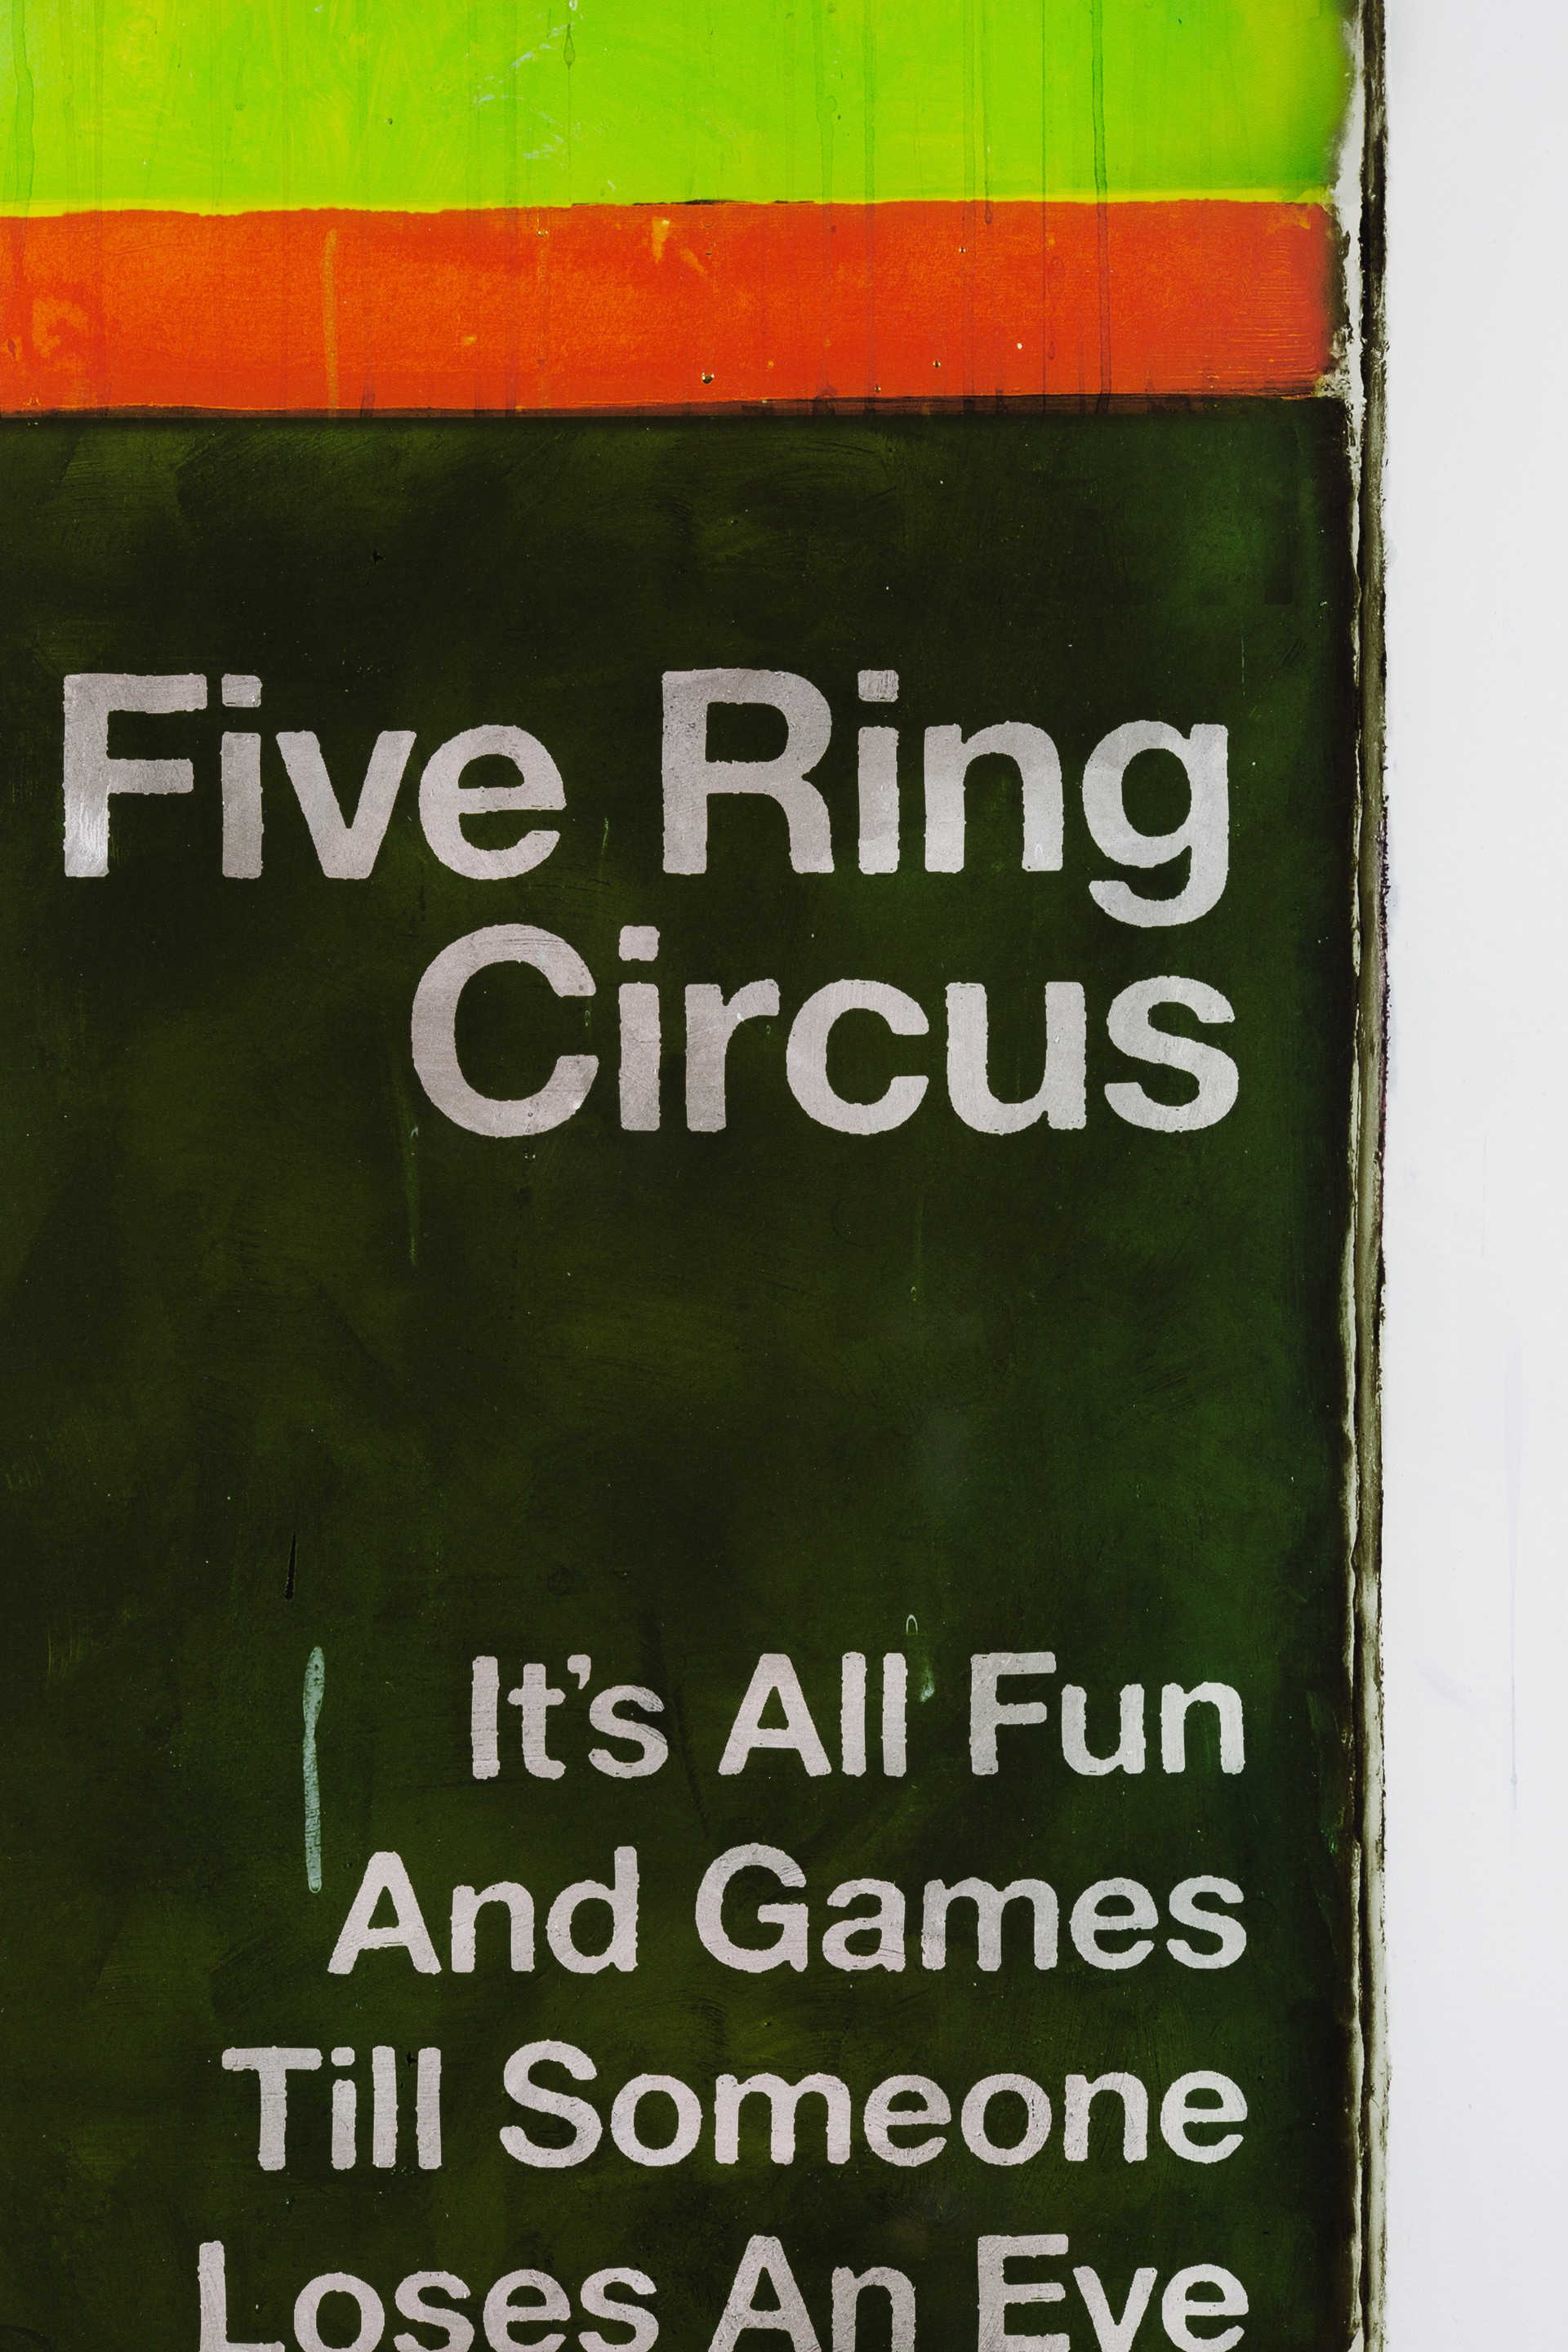 Five Ring Circus-It's All Fun and Games Till Someone Loses an Eye by Harland Miller